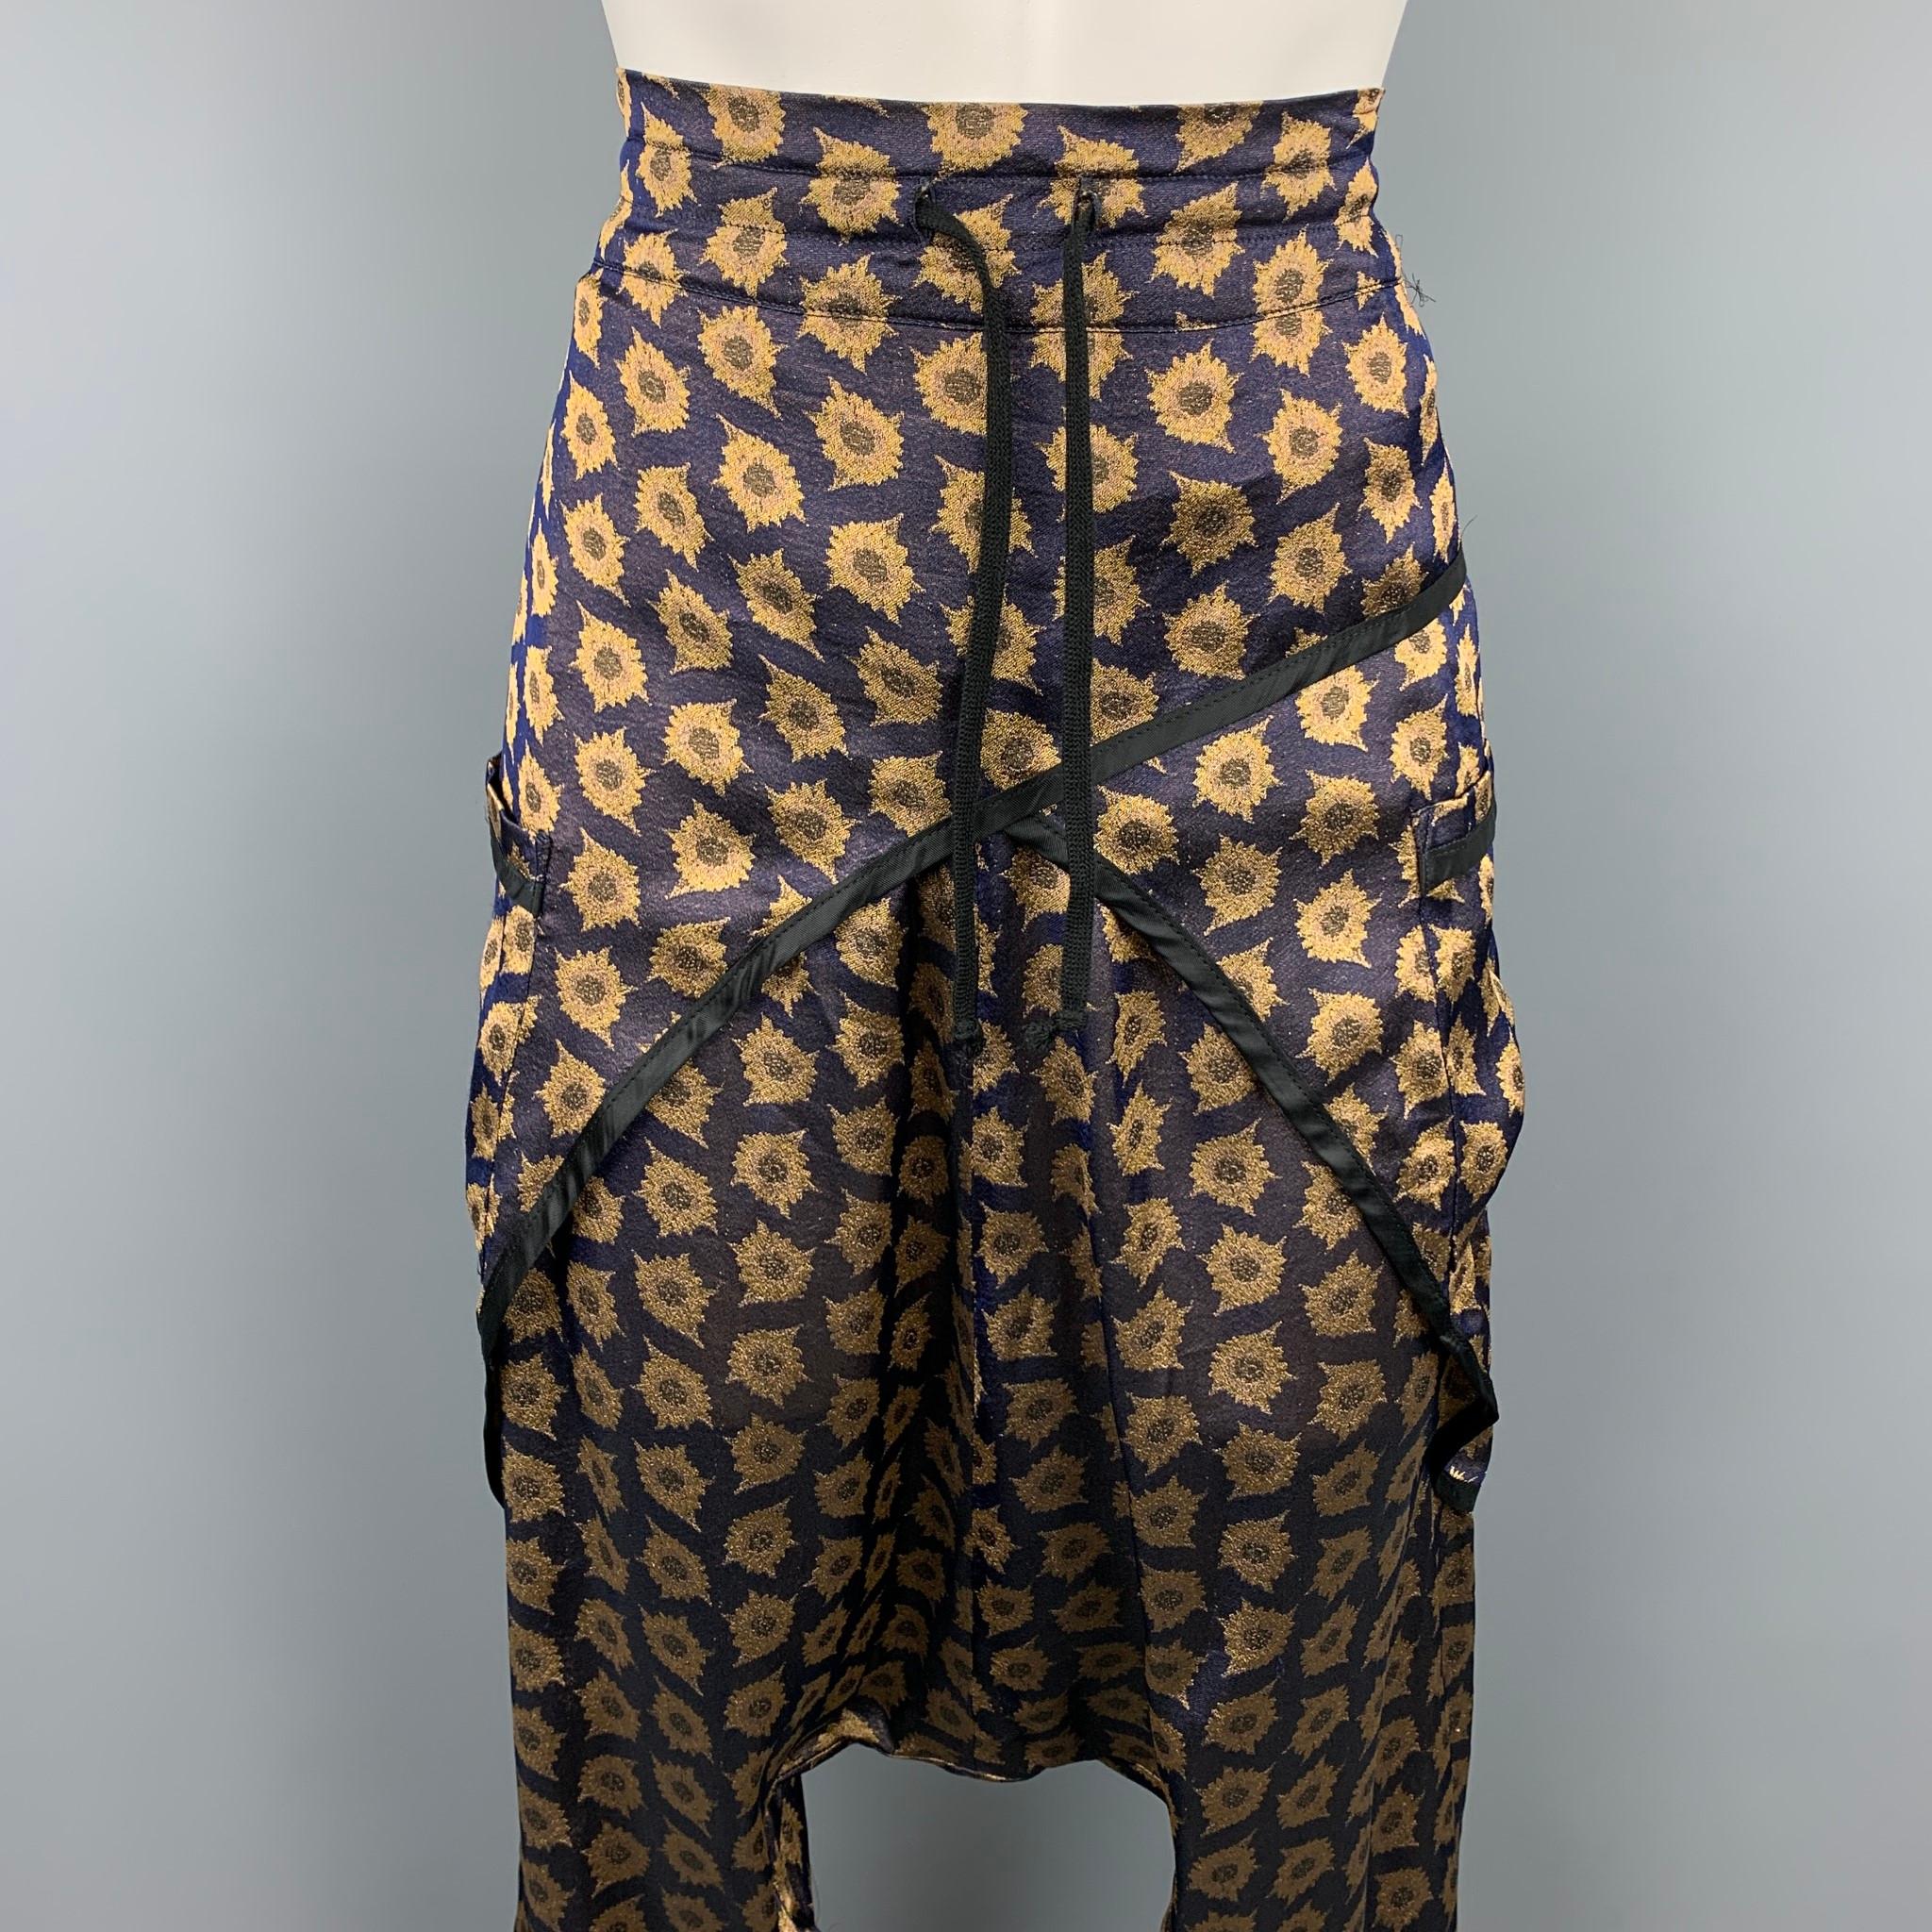 DRIES VAN NOTEN casual pants comes in a purple & gold print viscose/ silk featuring a drop-crotch style, front pockets, and a drawstring. 

Very Good Pre-Owned Condition.
Marked: 38

Measurements:

Waist: 32 in.
Rise: 24 in.
Inseam: 22 in. 

